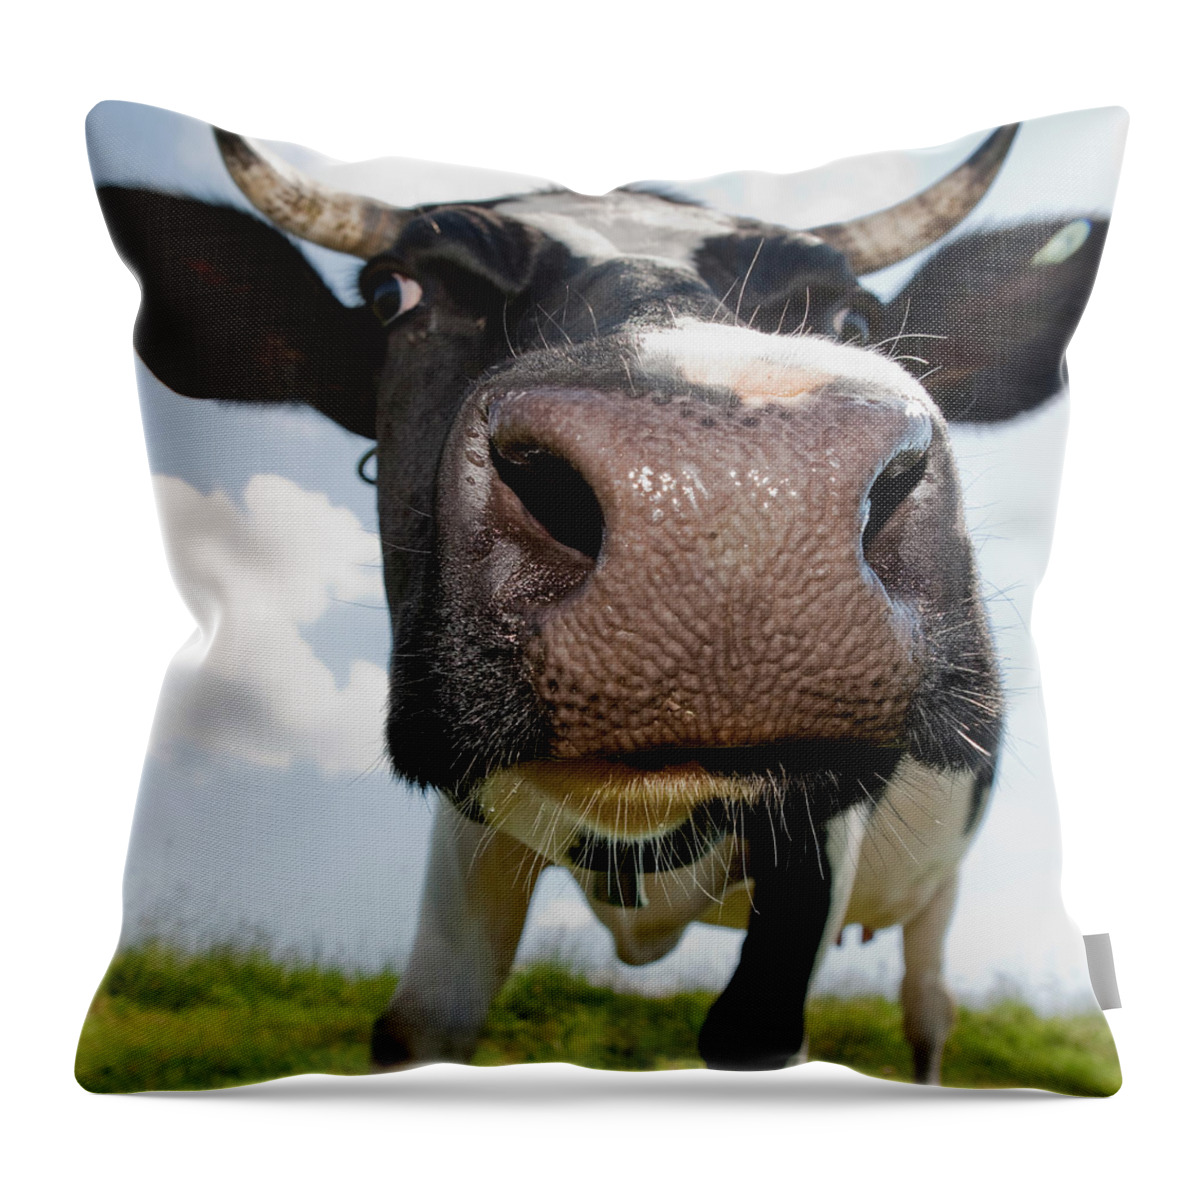 Horned Throw Pillow featuring the photograph Cow #1 by Roine Magnusson